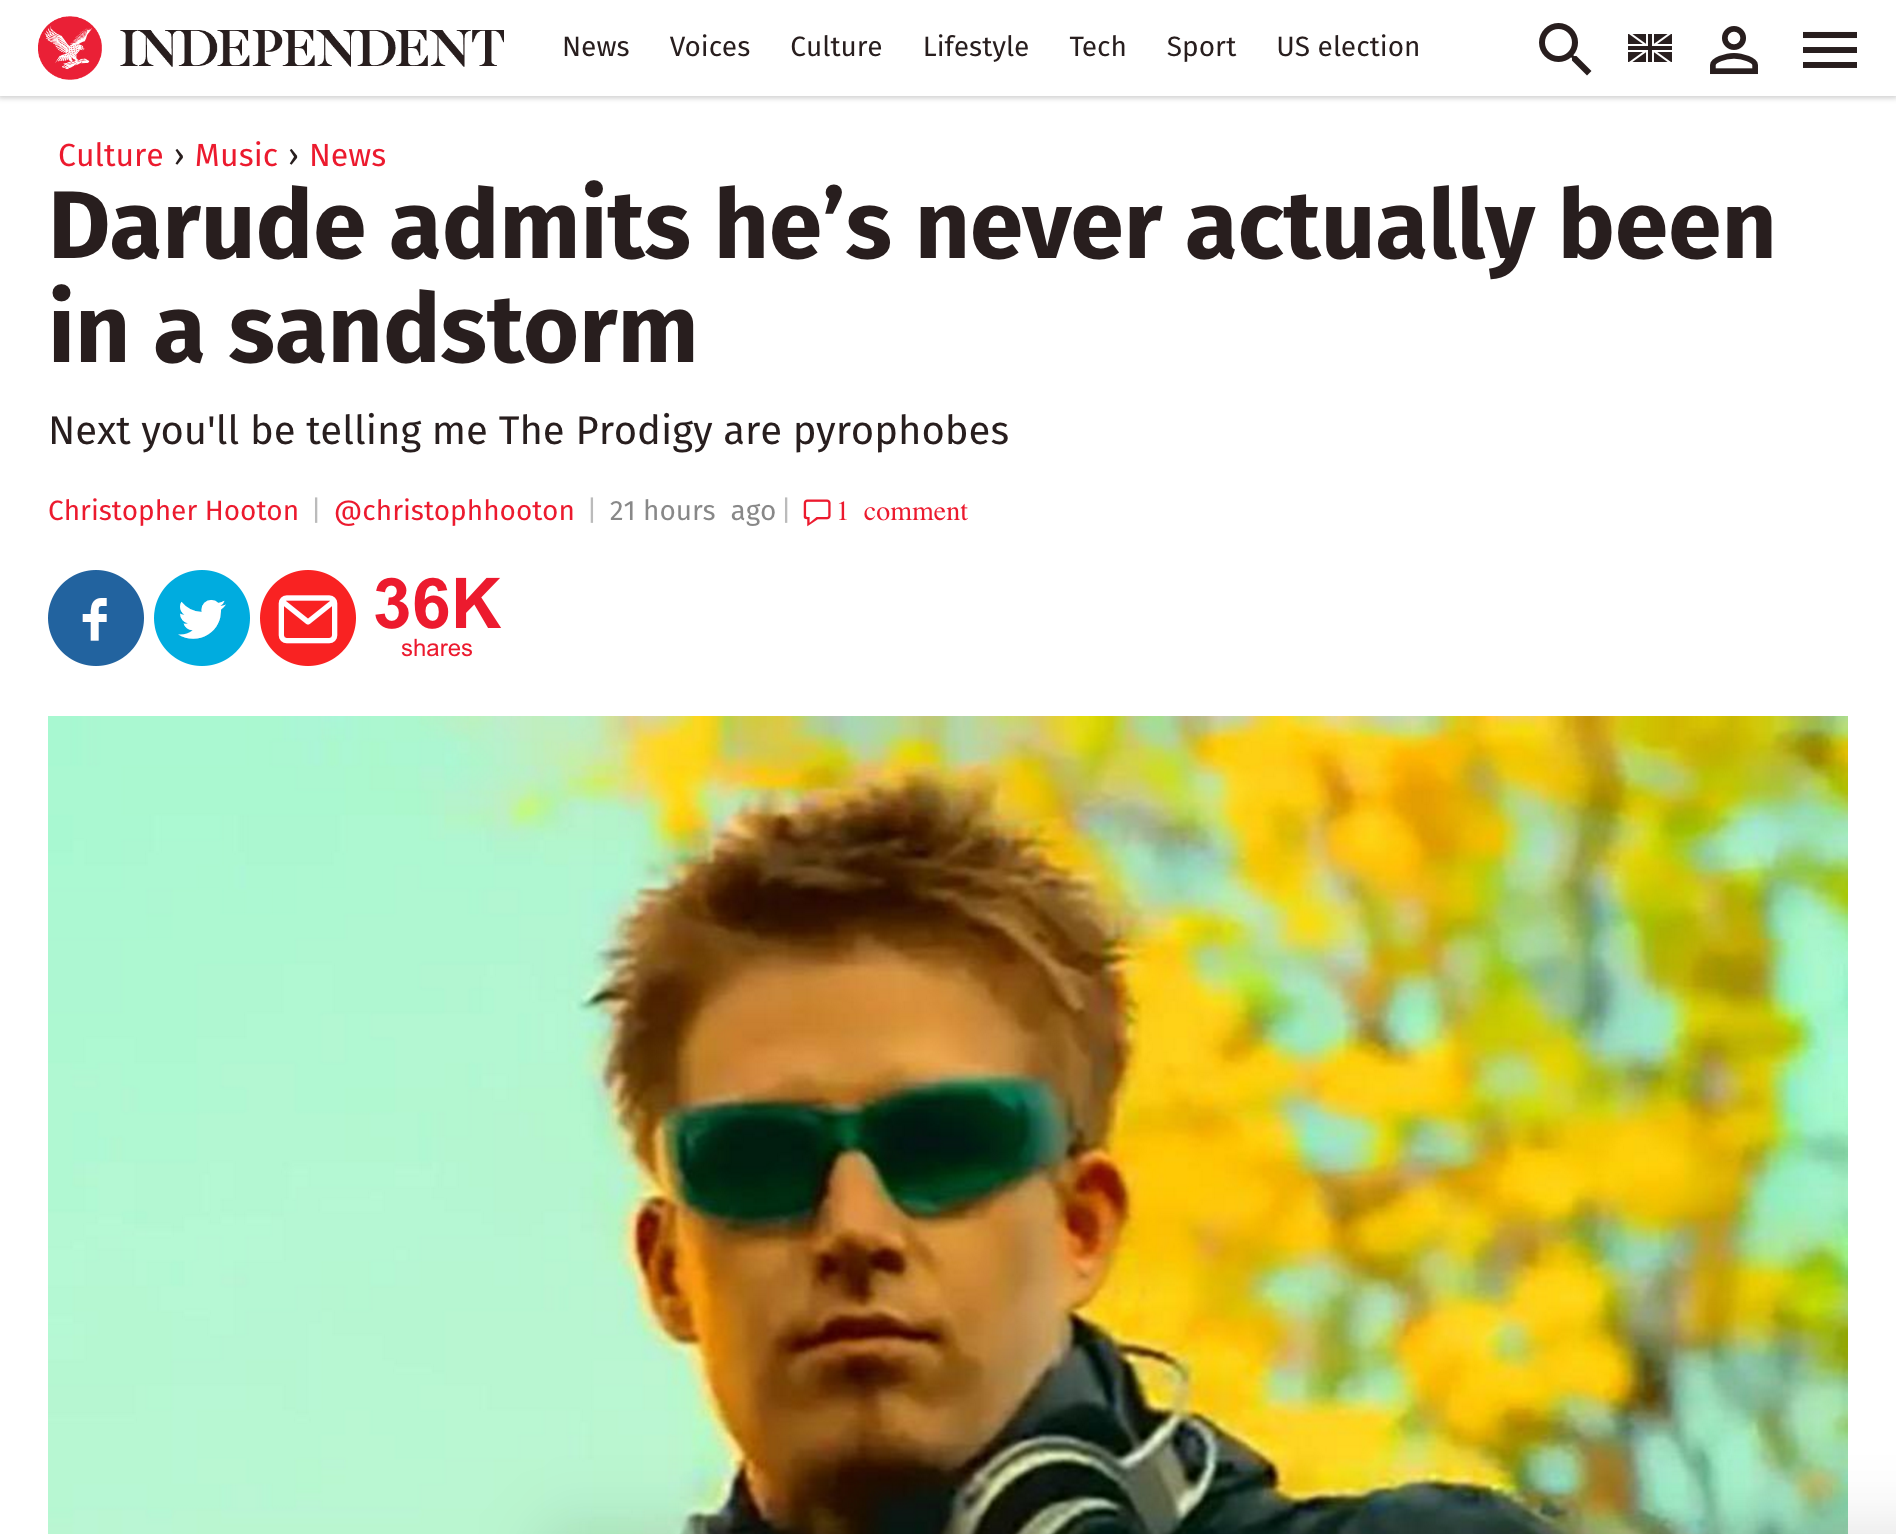 memes - sandstorm darude - Independent News Voices Culture Lifestyle Tech Sport Us election Culture > Music > News Darude admits he's never actually been in a sandstorm Next you'll be telling me The Prodigy are pyrophobes Christopher Hooton christophhooto